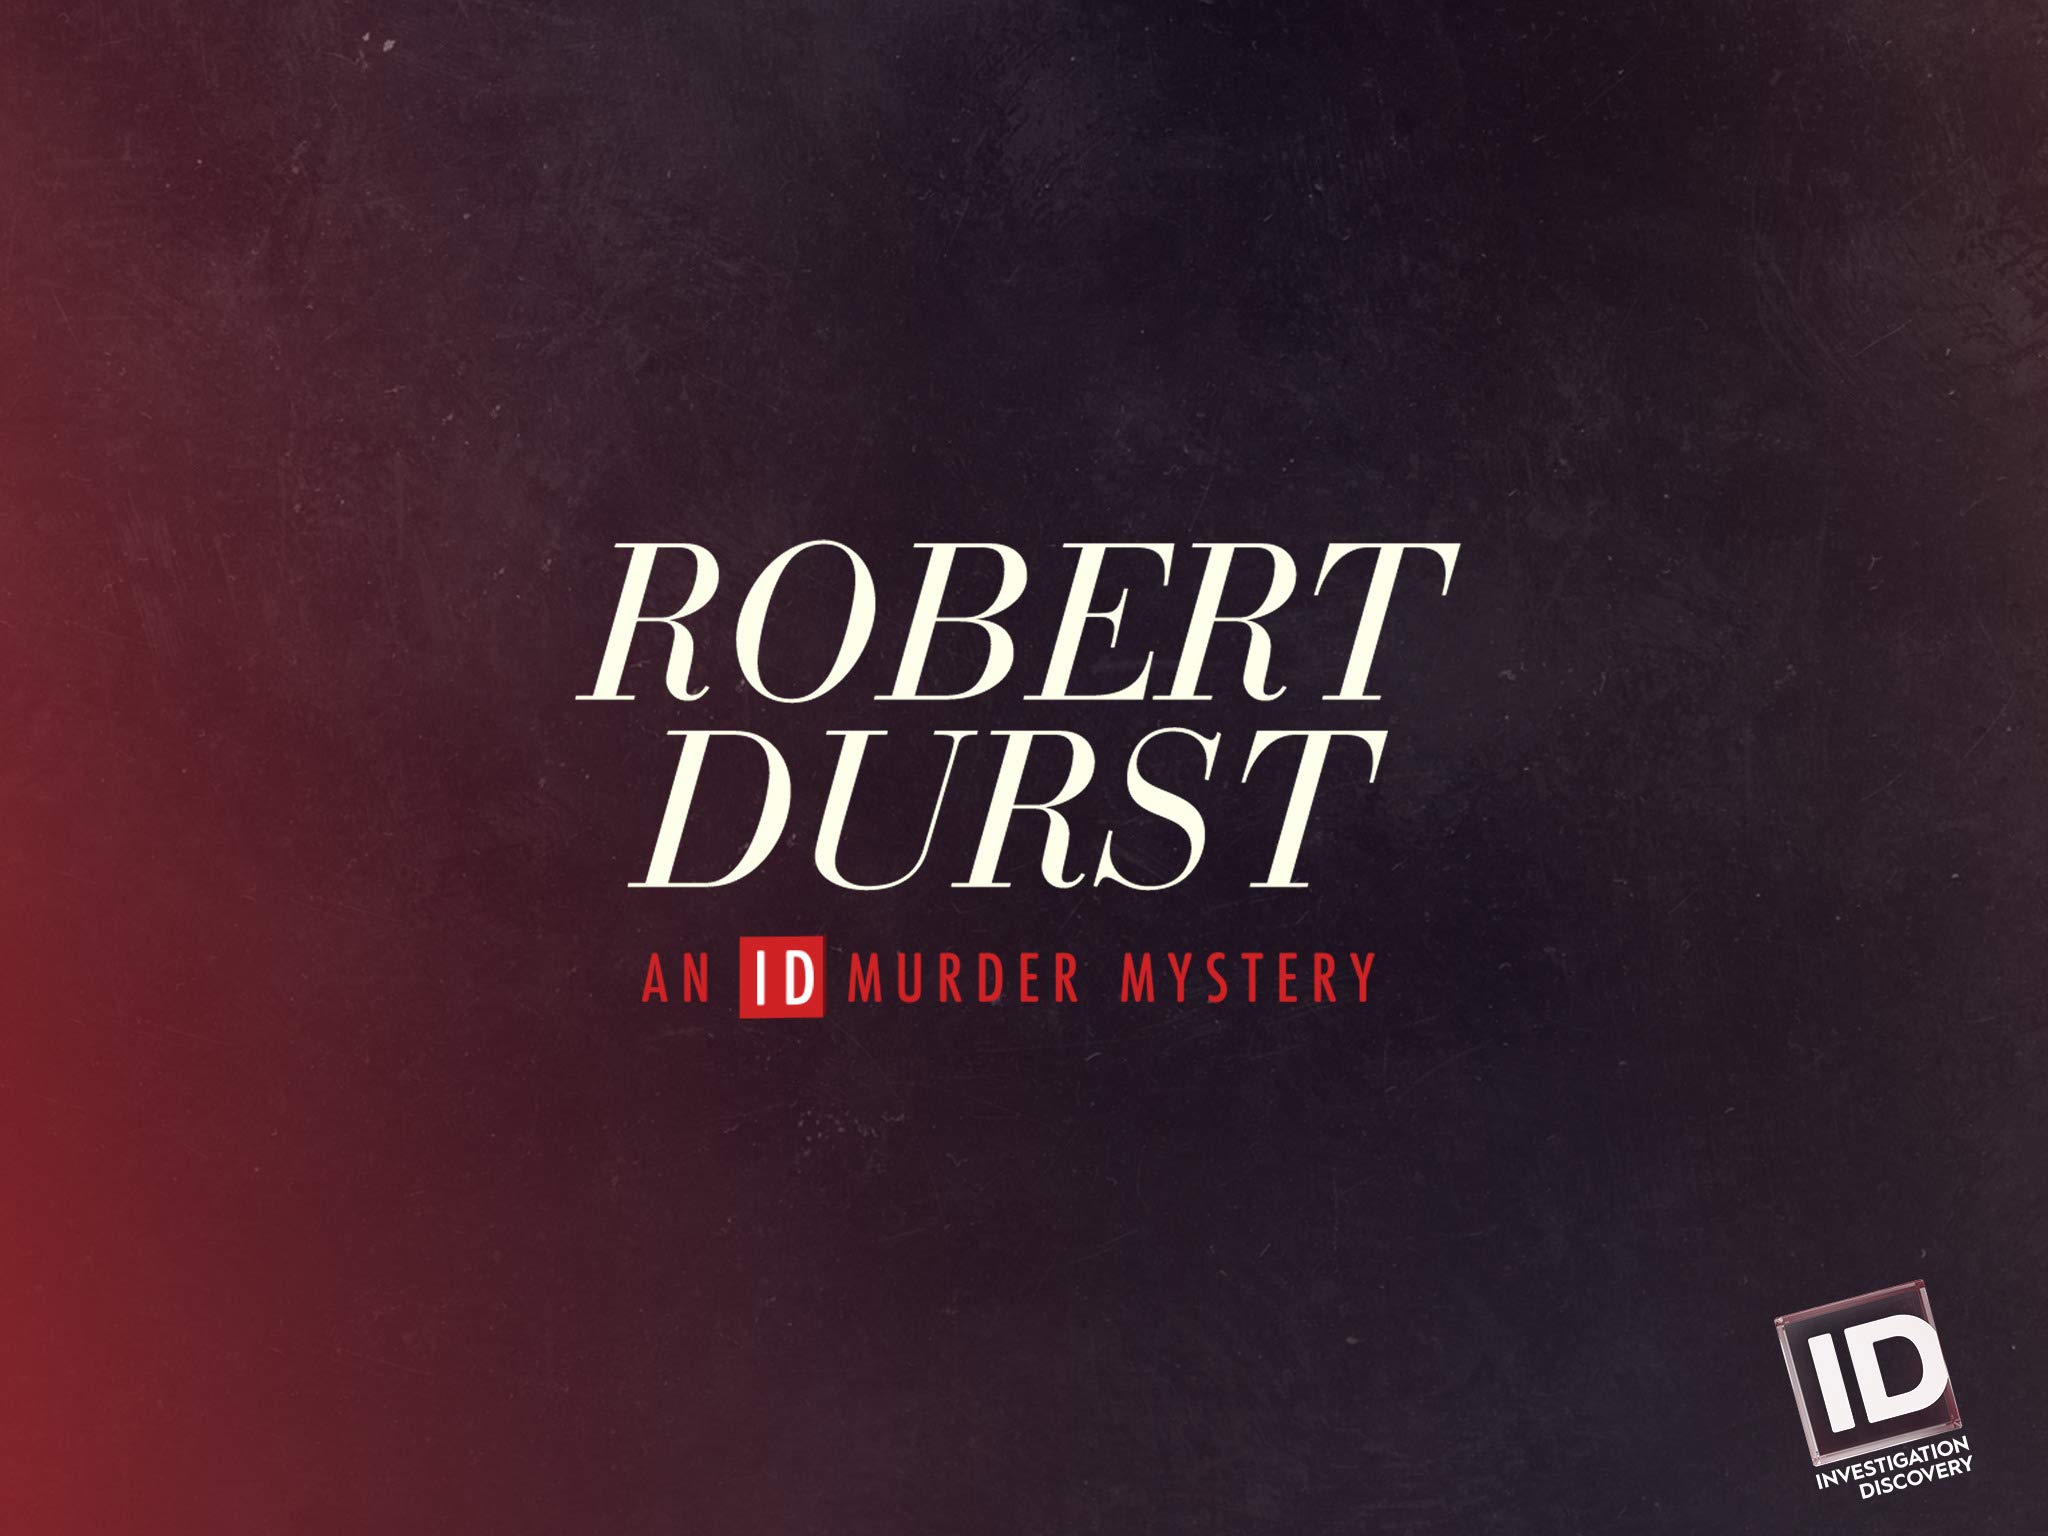 TV ratings for Robert Durst: An Id Murder Mystery in Brazil. investigation discovery TV series